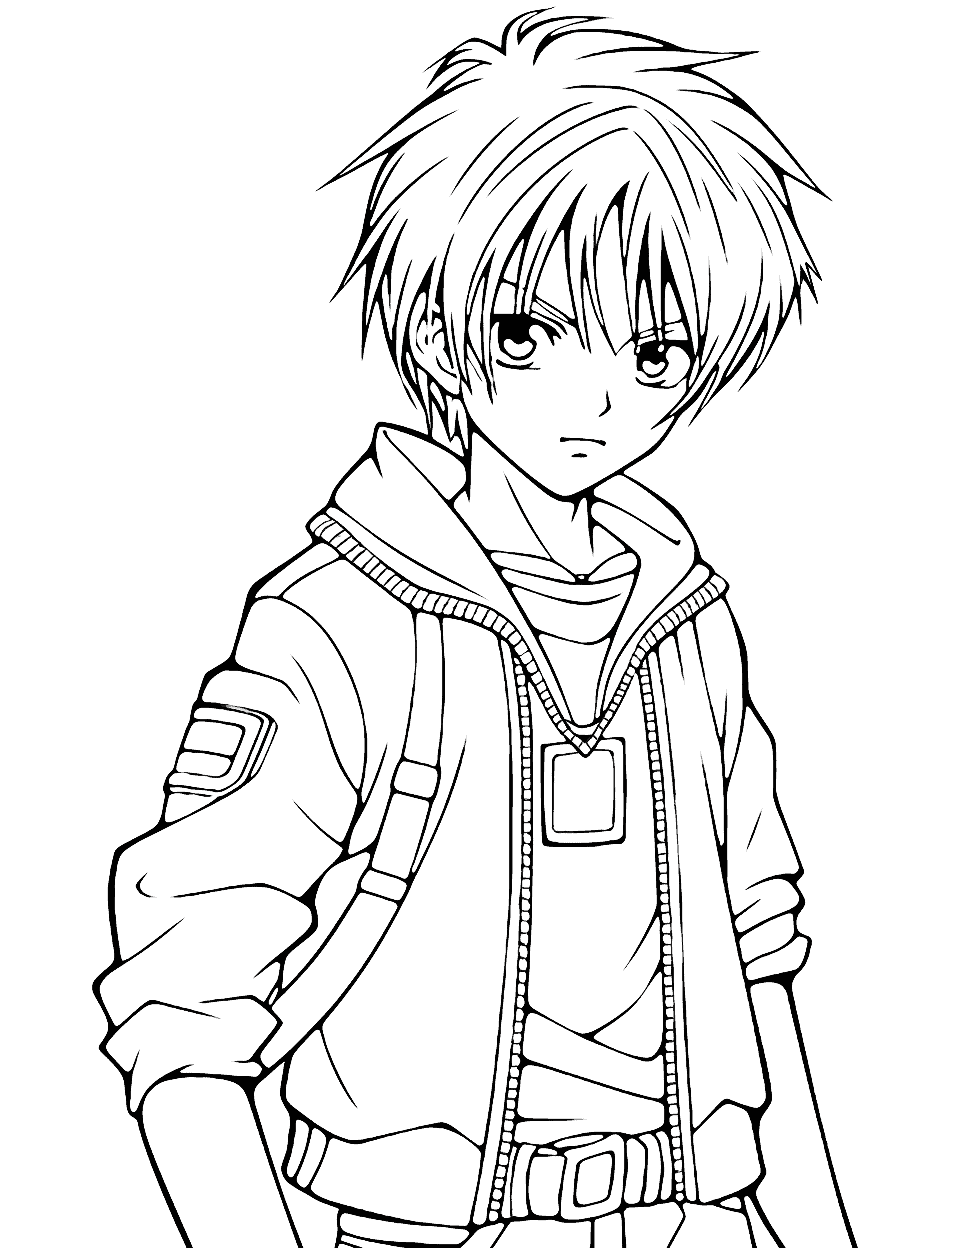 Beautiful Anime Boy Coloring Page - A beautiful anime boy with a serene expression and a detailed outfit.